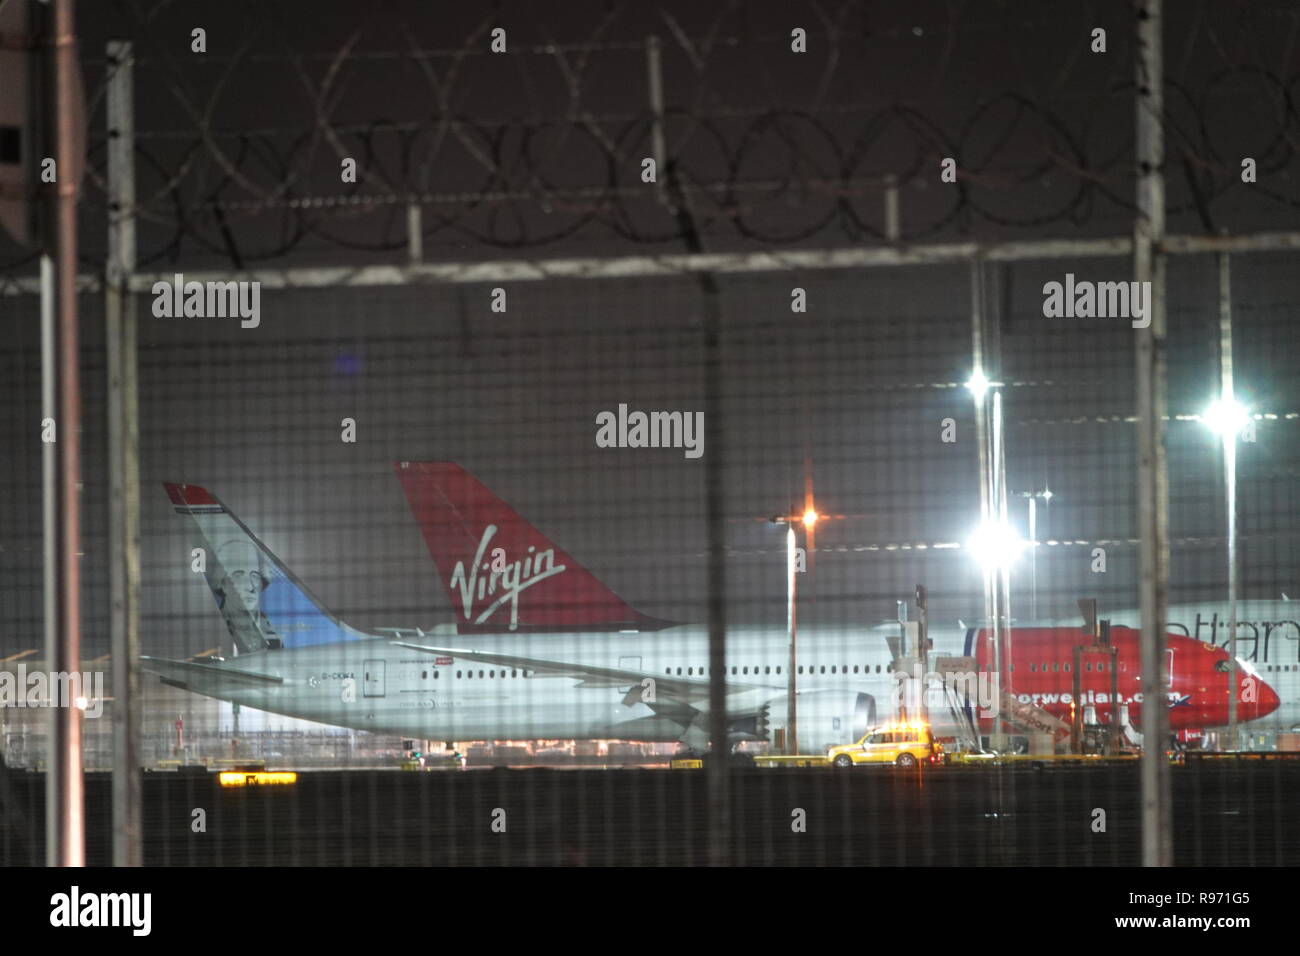 London Gatwick, UK. 20th December, 2018. Passenger jet airplanes grounded at Gatwick Airport on Thursday night, as drone activity causes the airport to close for over 24 hours. Credit: Andy Stehrenberger/Alamy Live News Stock Photo